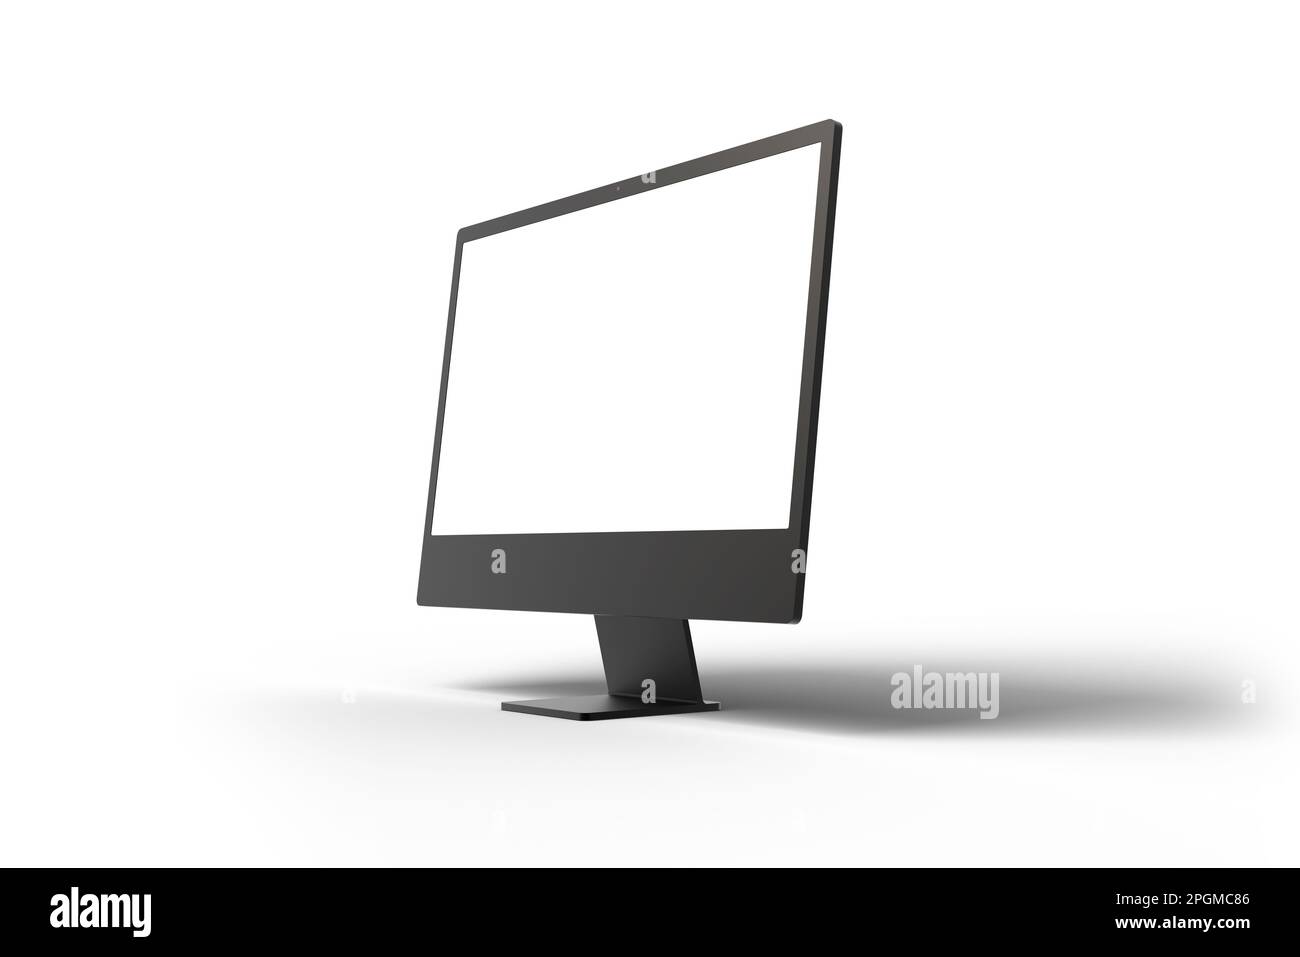 Black computer display on white suraface with shadow. Isolated screen for design promotion Stock Photo